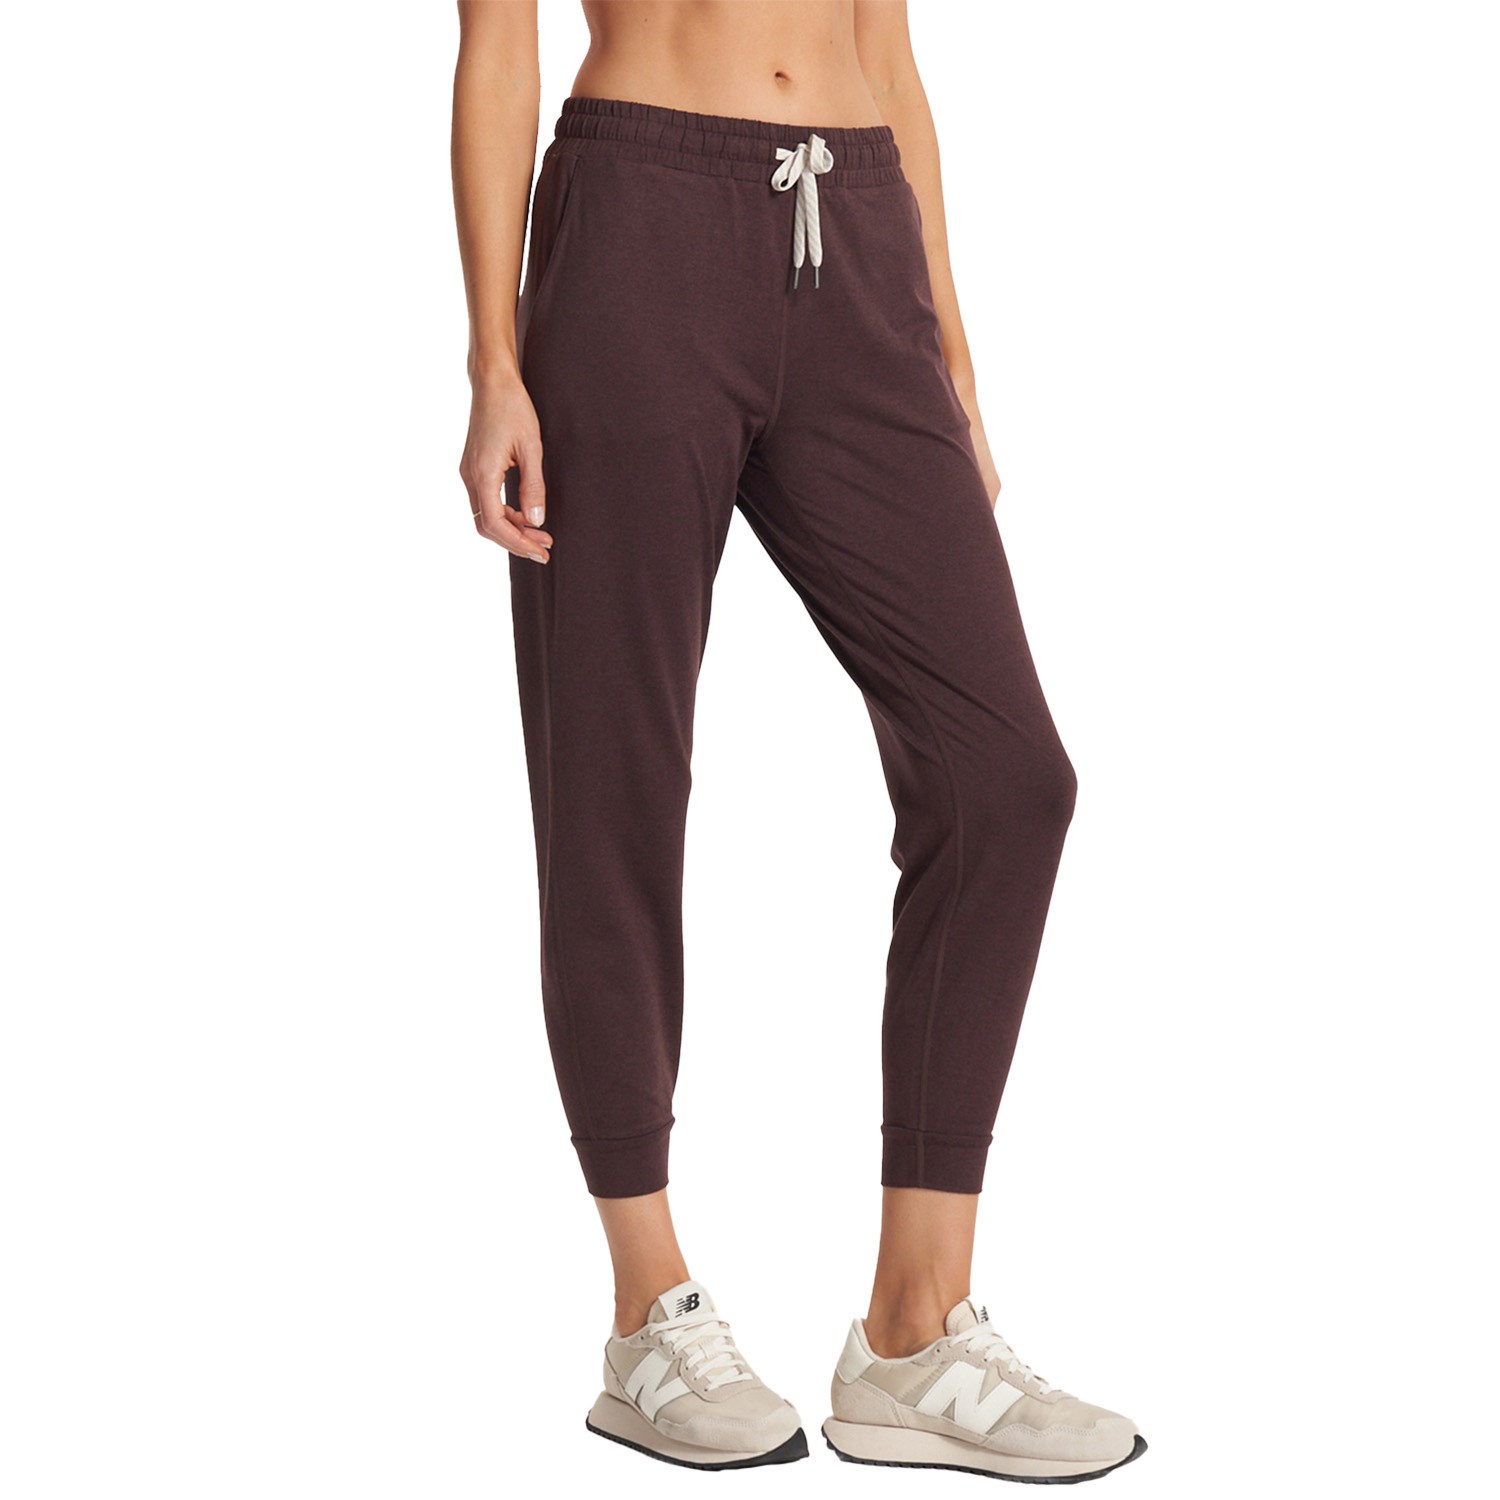 Why Vuori joggers are the only joggers that matter + a quiz to